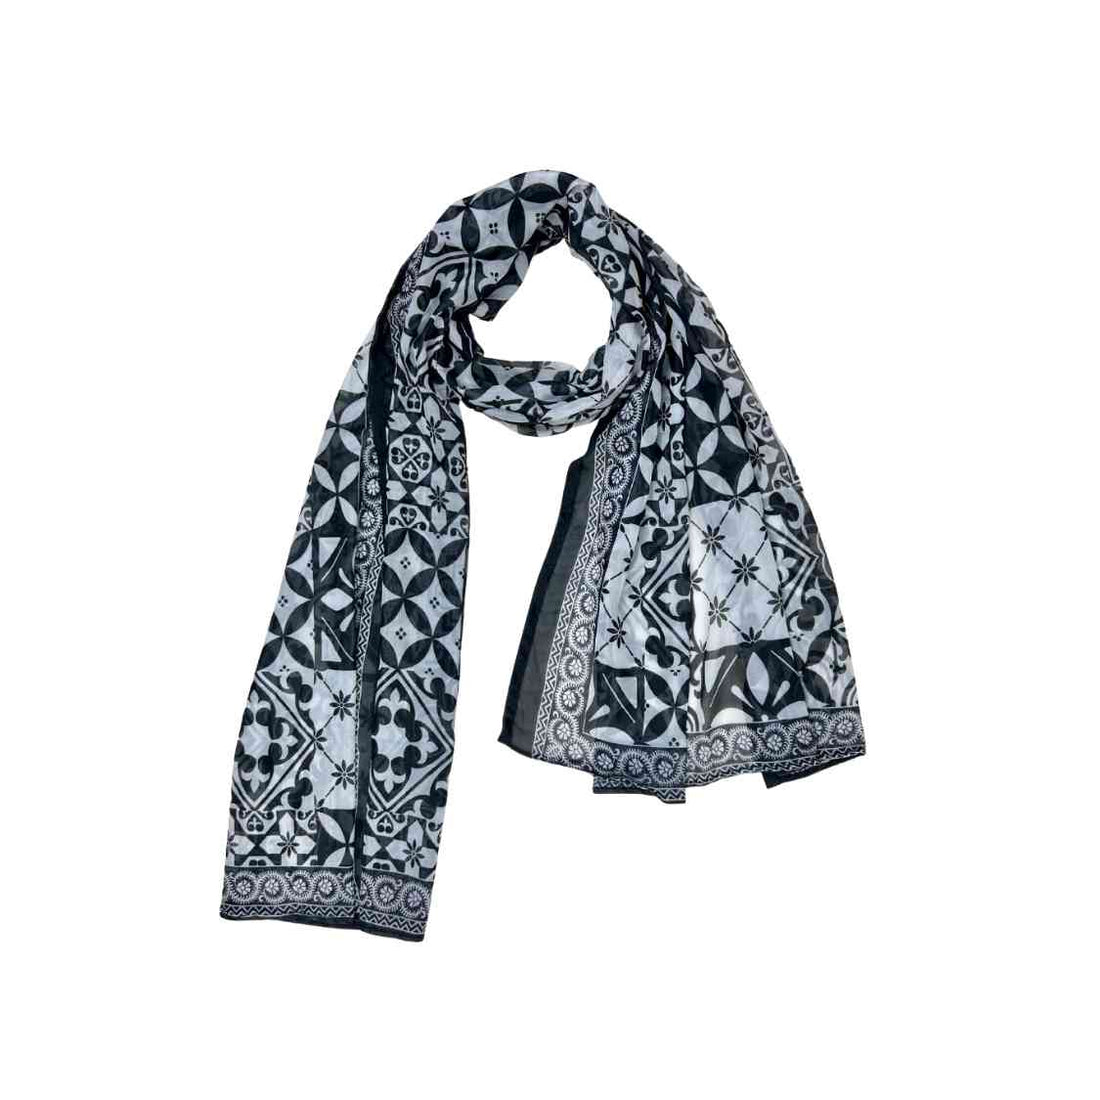 Tissue Silk Scarf, Black And White Printed Pattern